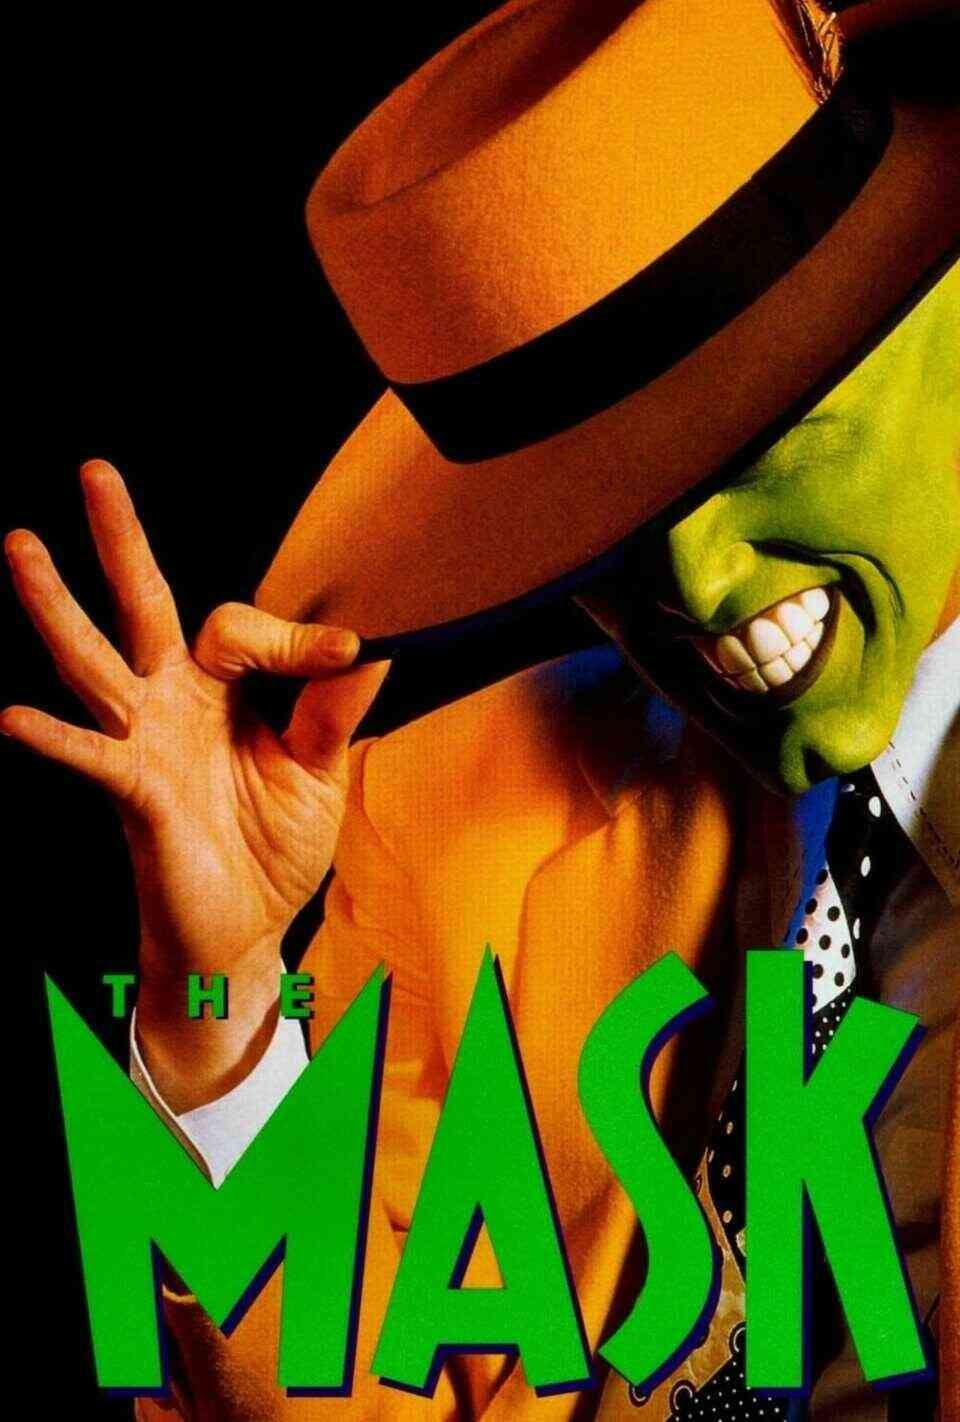 Read The Mask screenplay (poster)